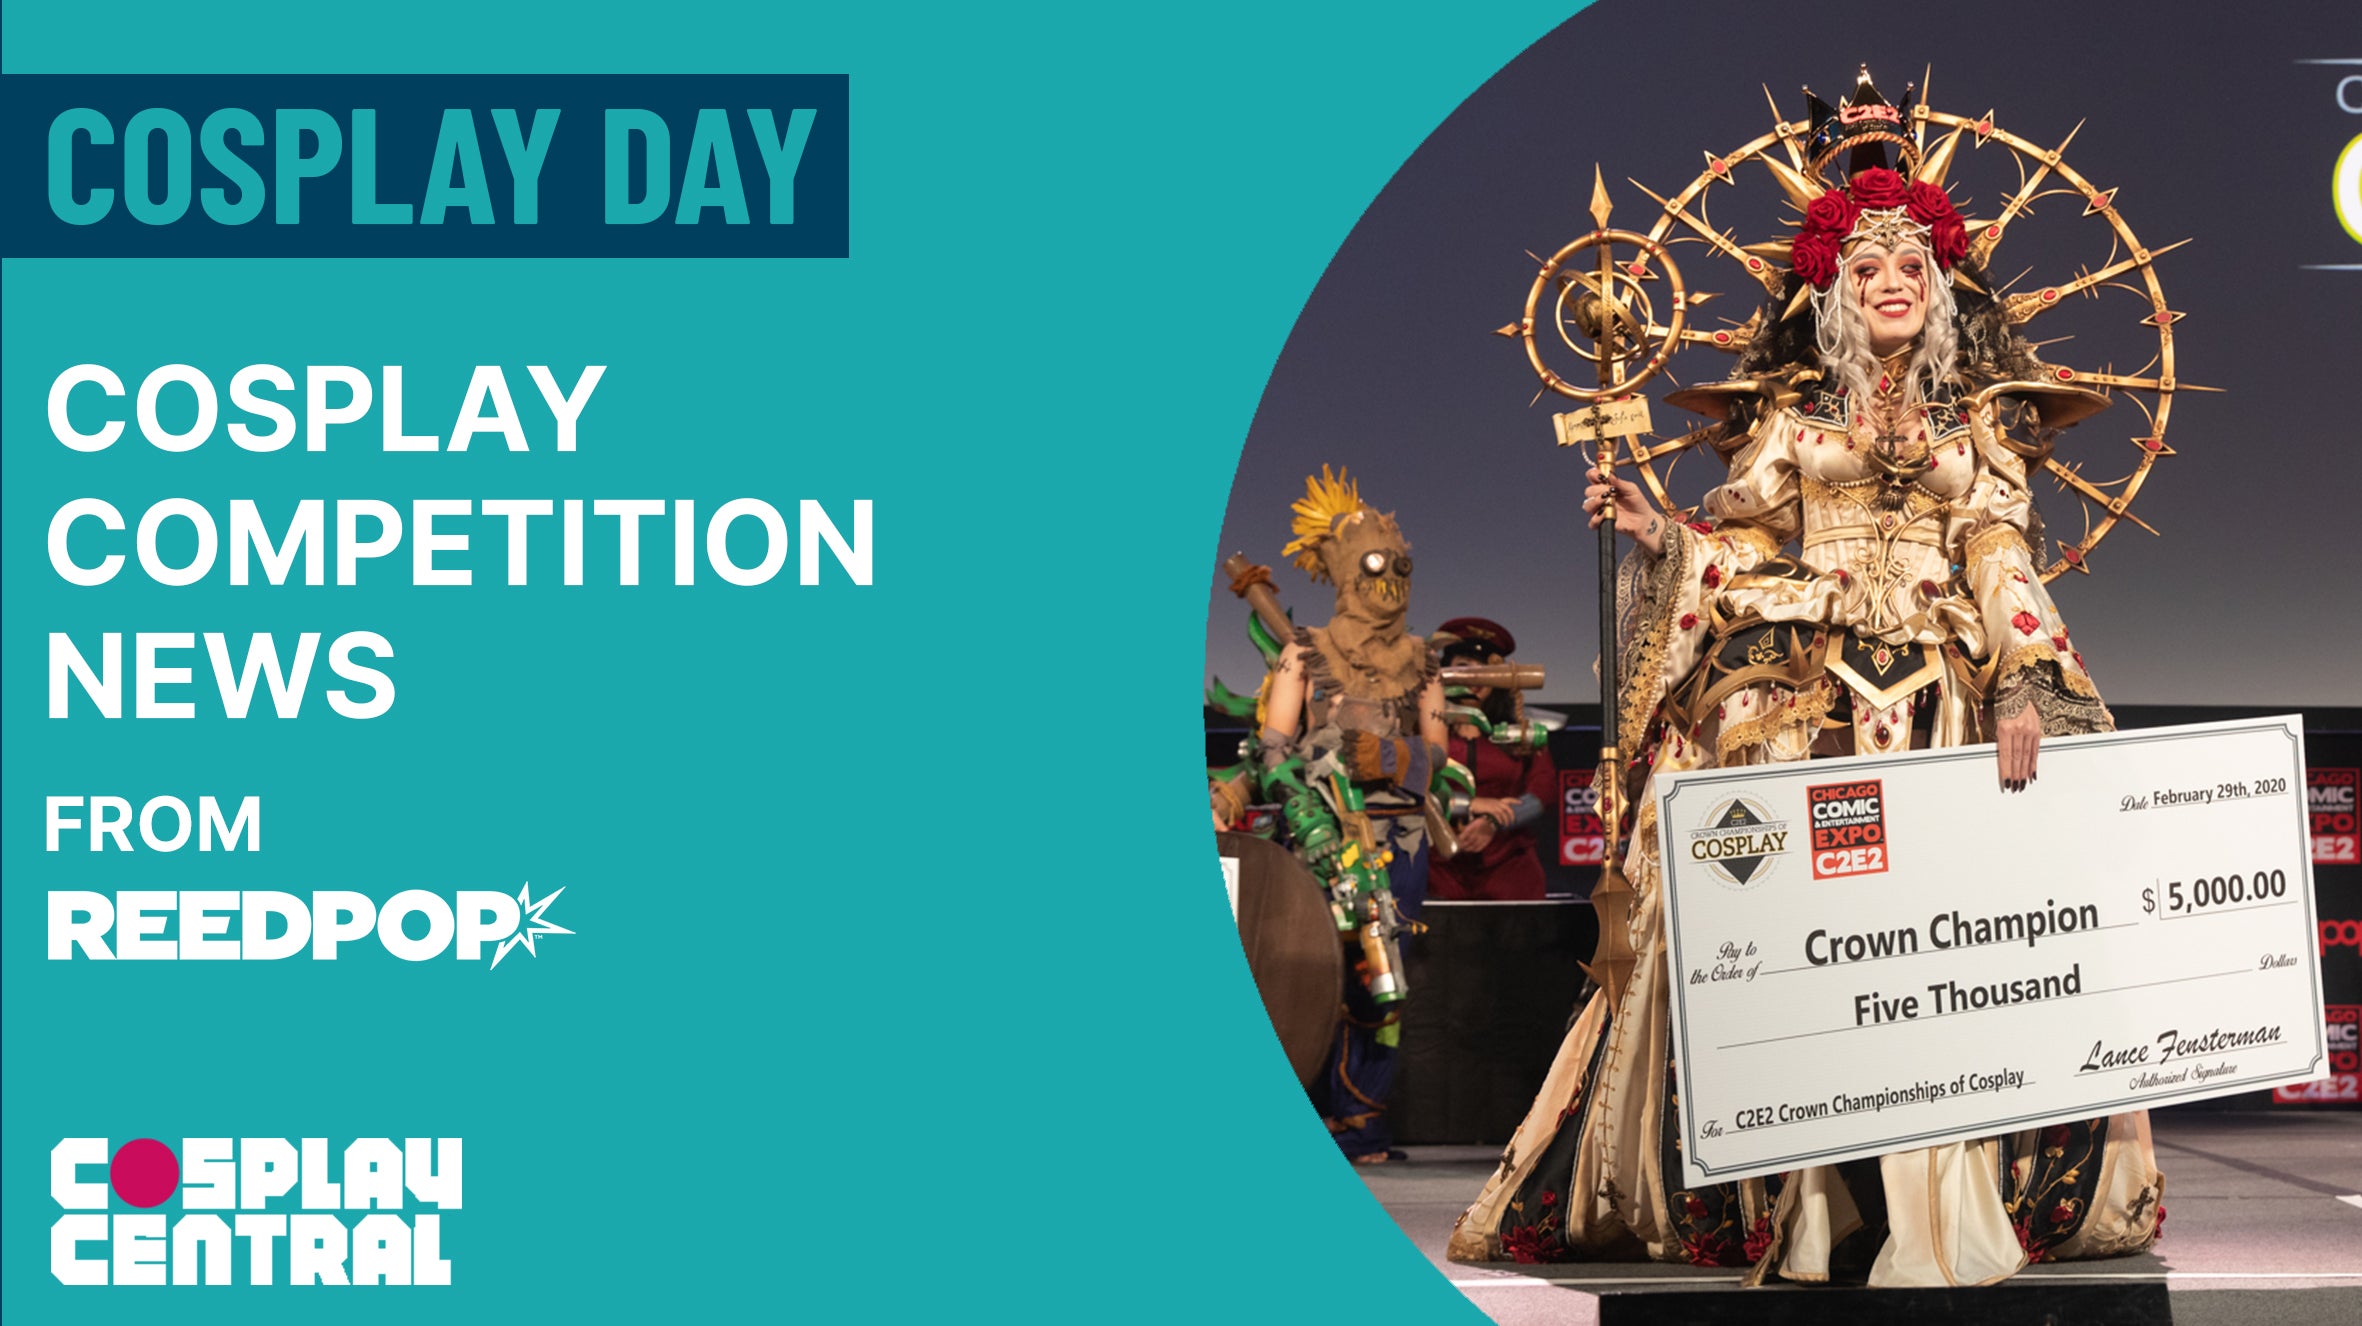 Image for Register Now For The Cosplay Central Crown Championships